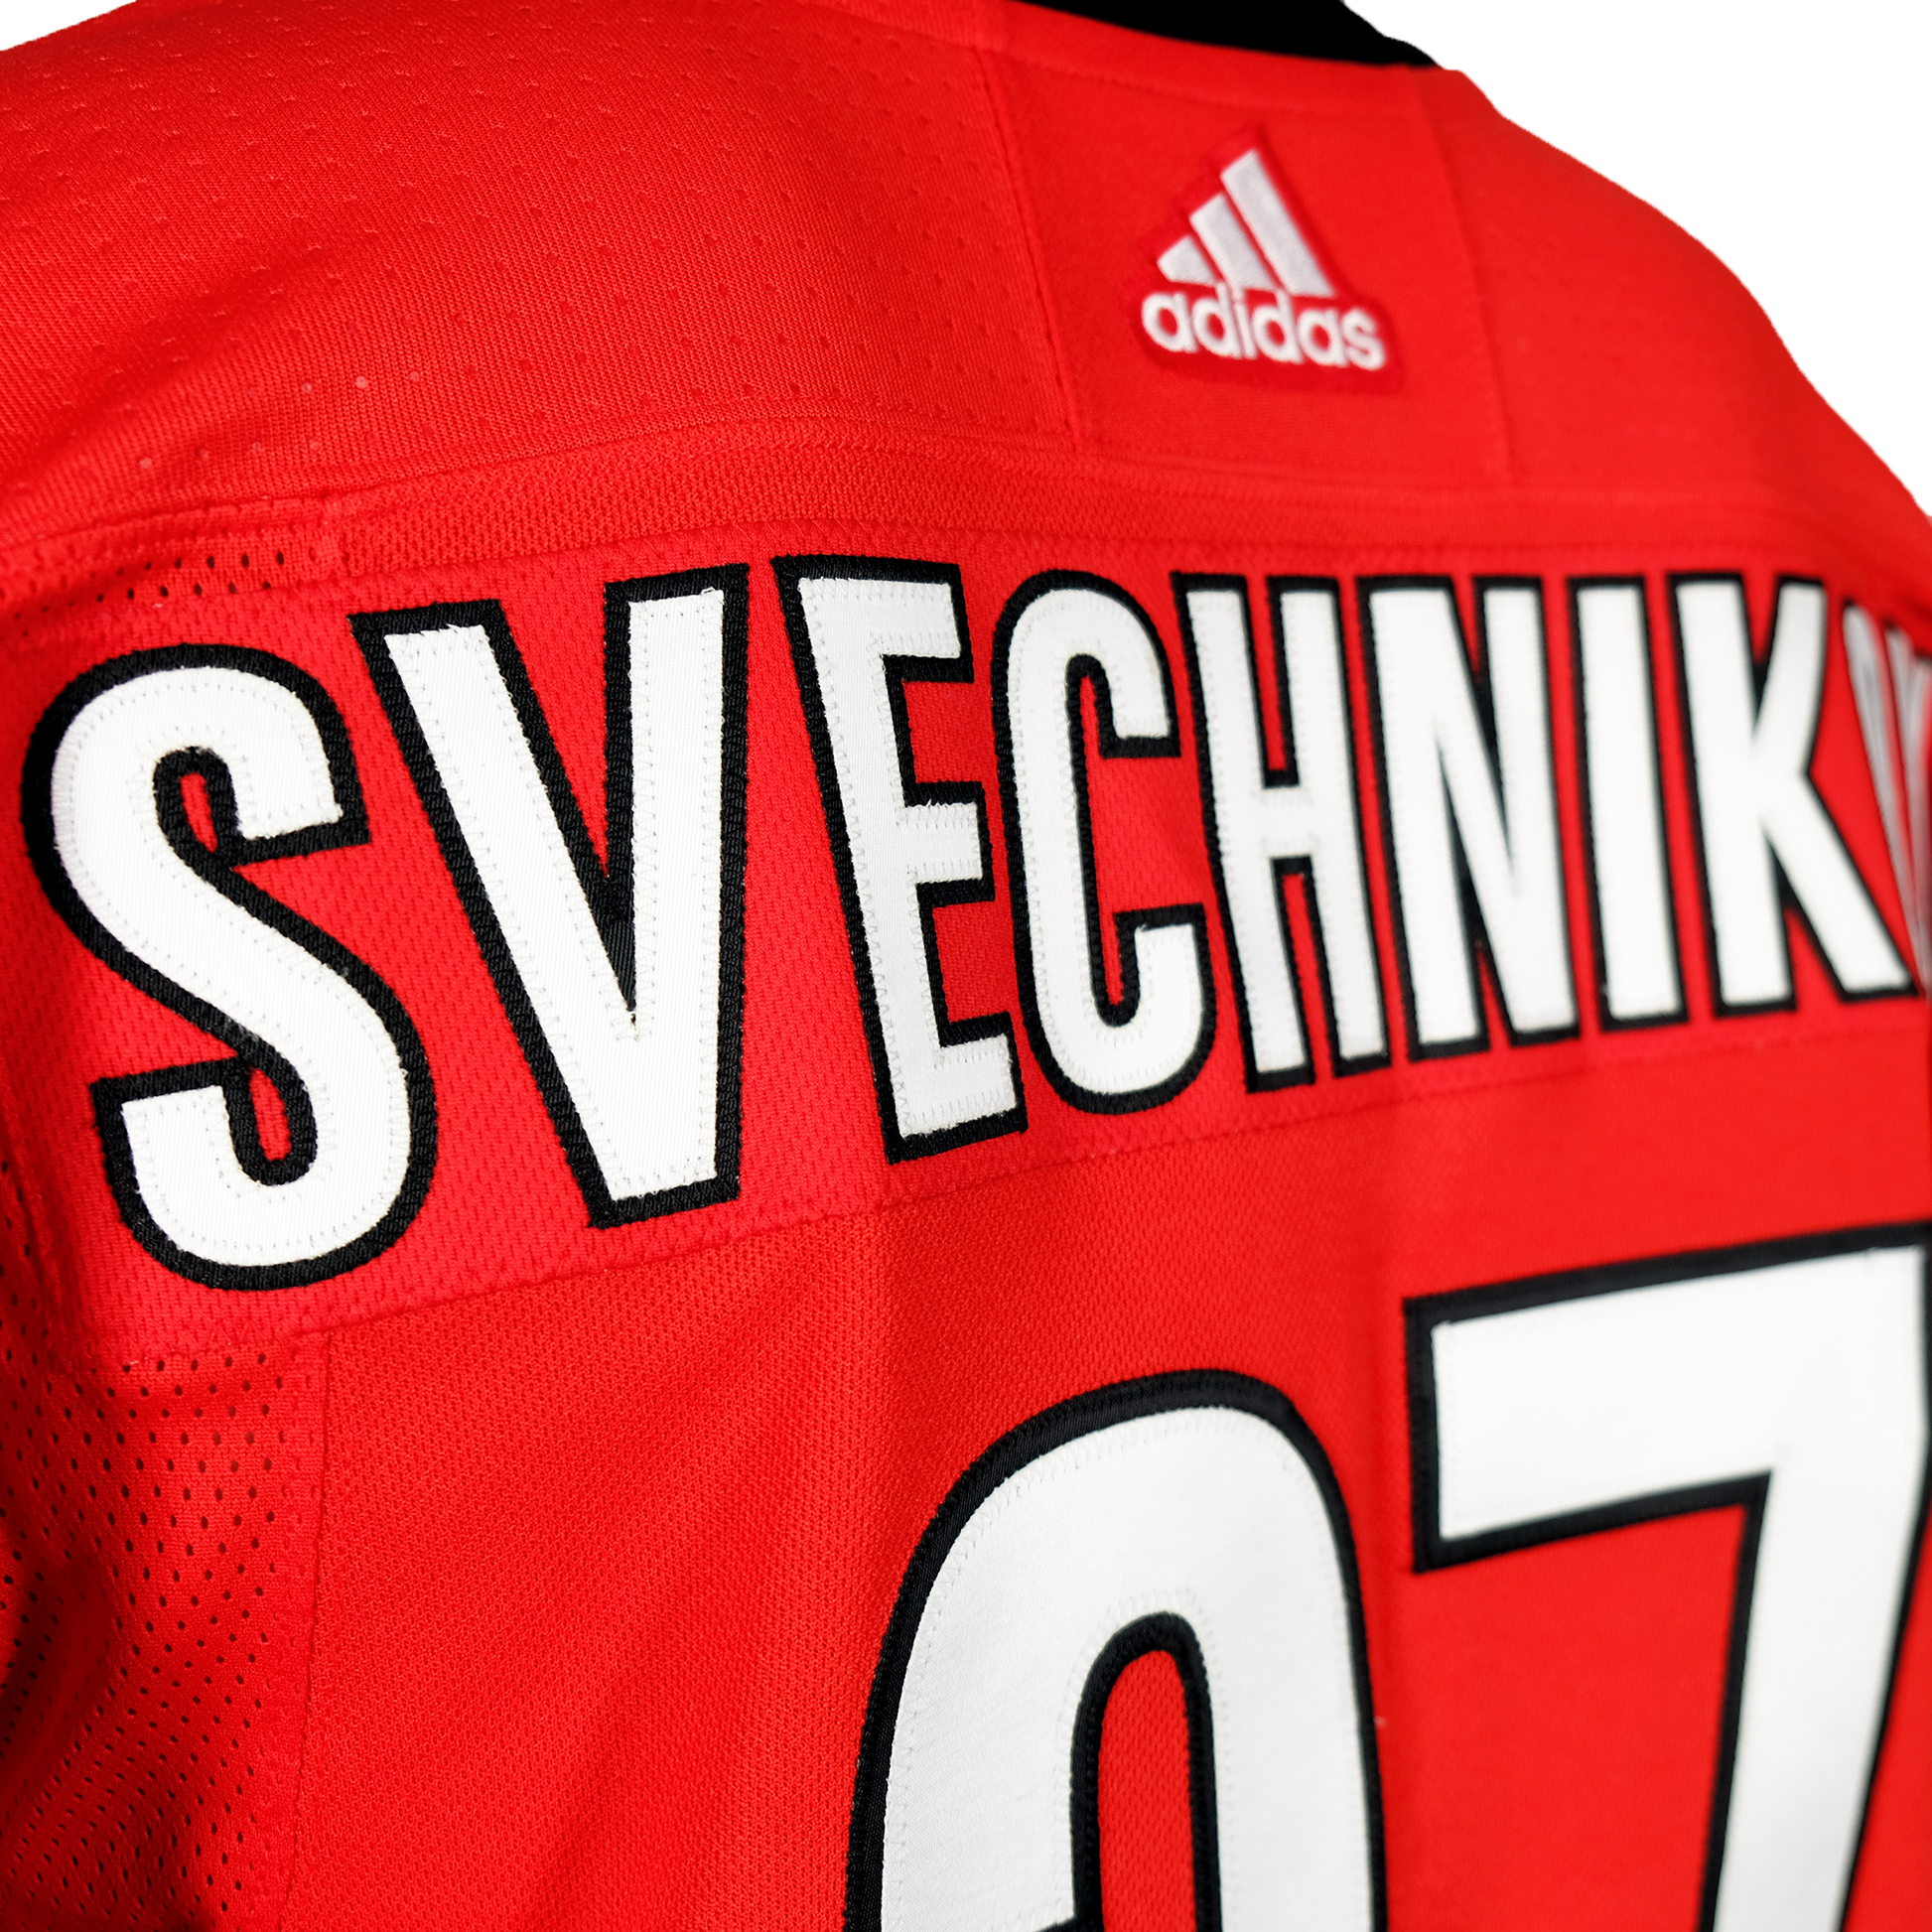 Close up of stitching of nameplate that reads "Svechnikov"